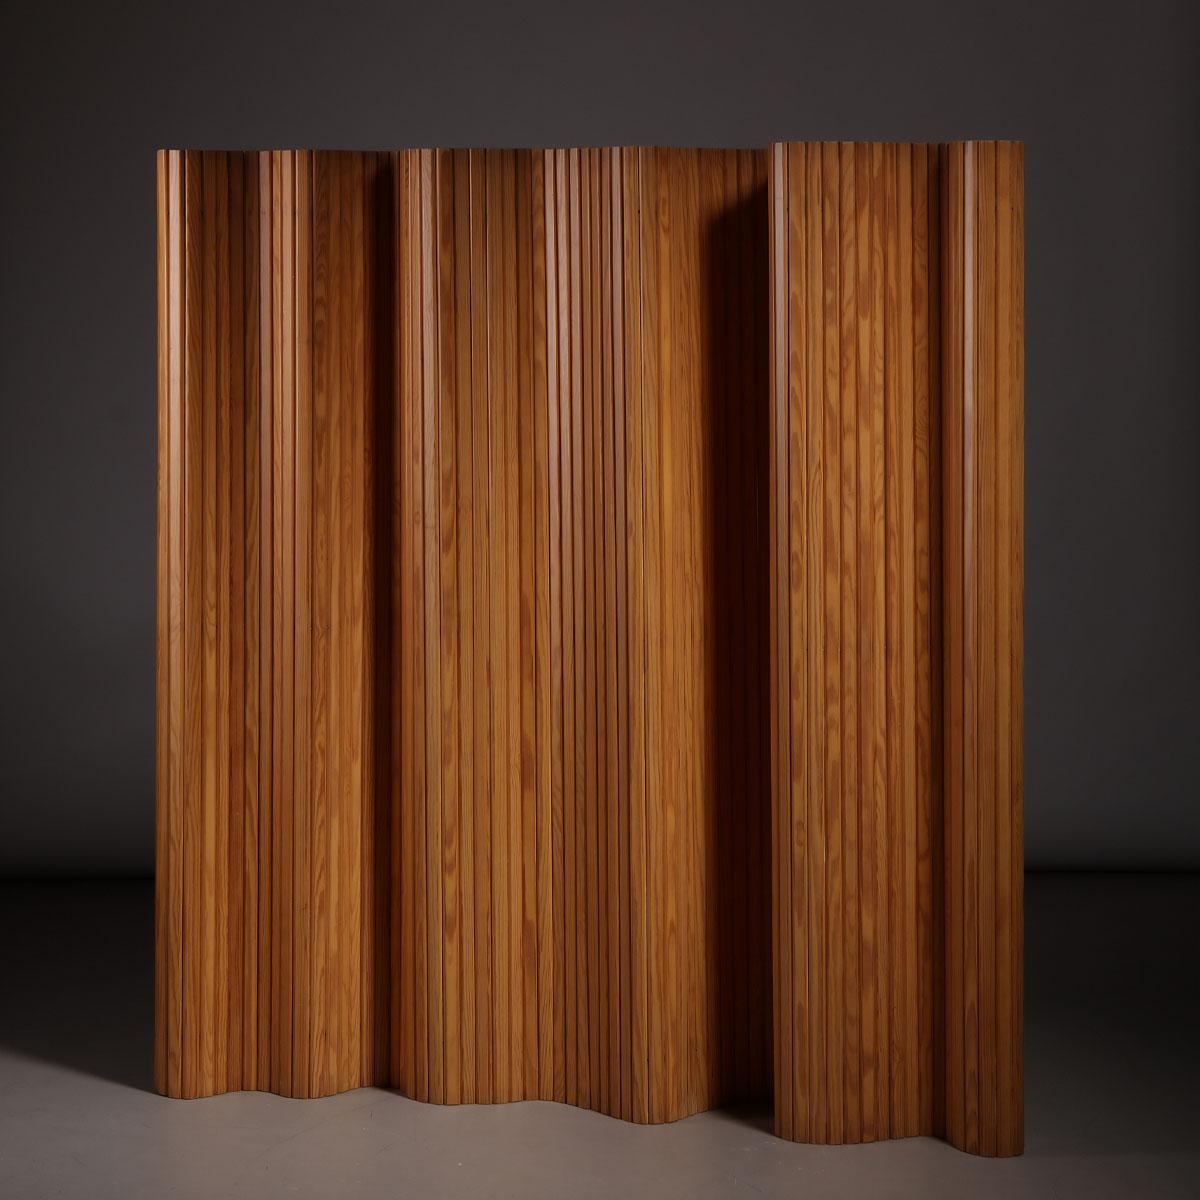 Rare pinewood room divider model 100 designed by Alvar Aalto for Artek in Finland, 1940s.

This rare room divider, designed by renowned Finnish architect and designer Alvar Aalto and manufactured by Artek in the 1940s, consists of individual thin